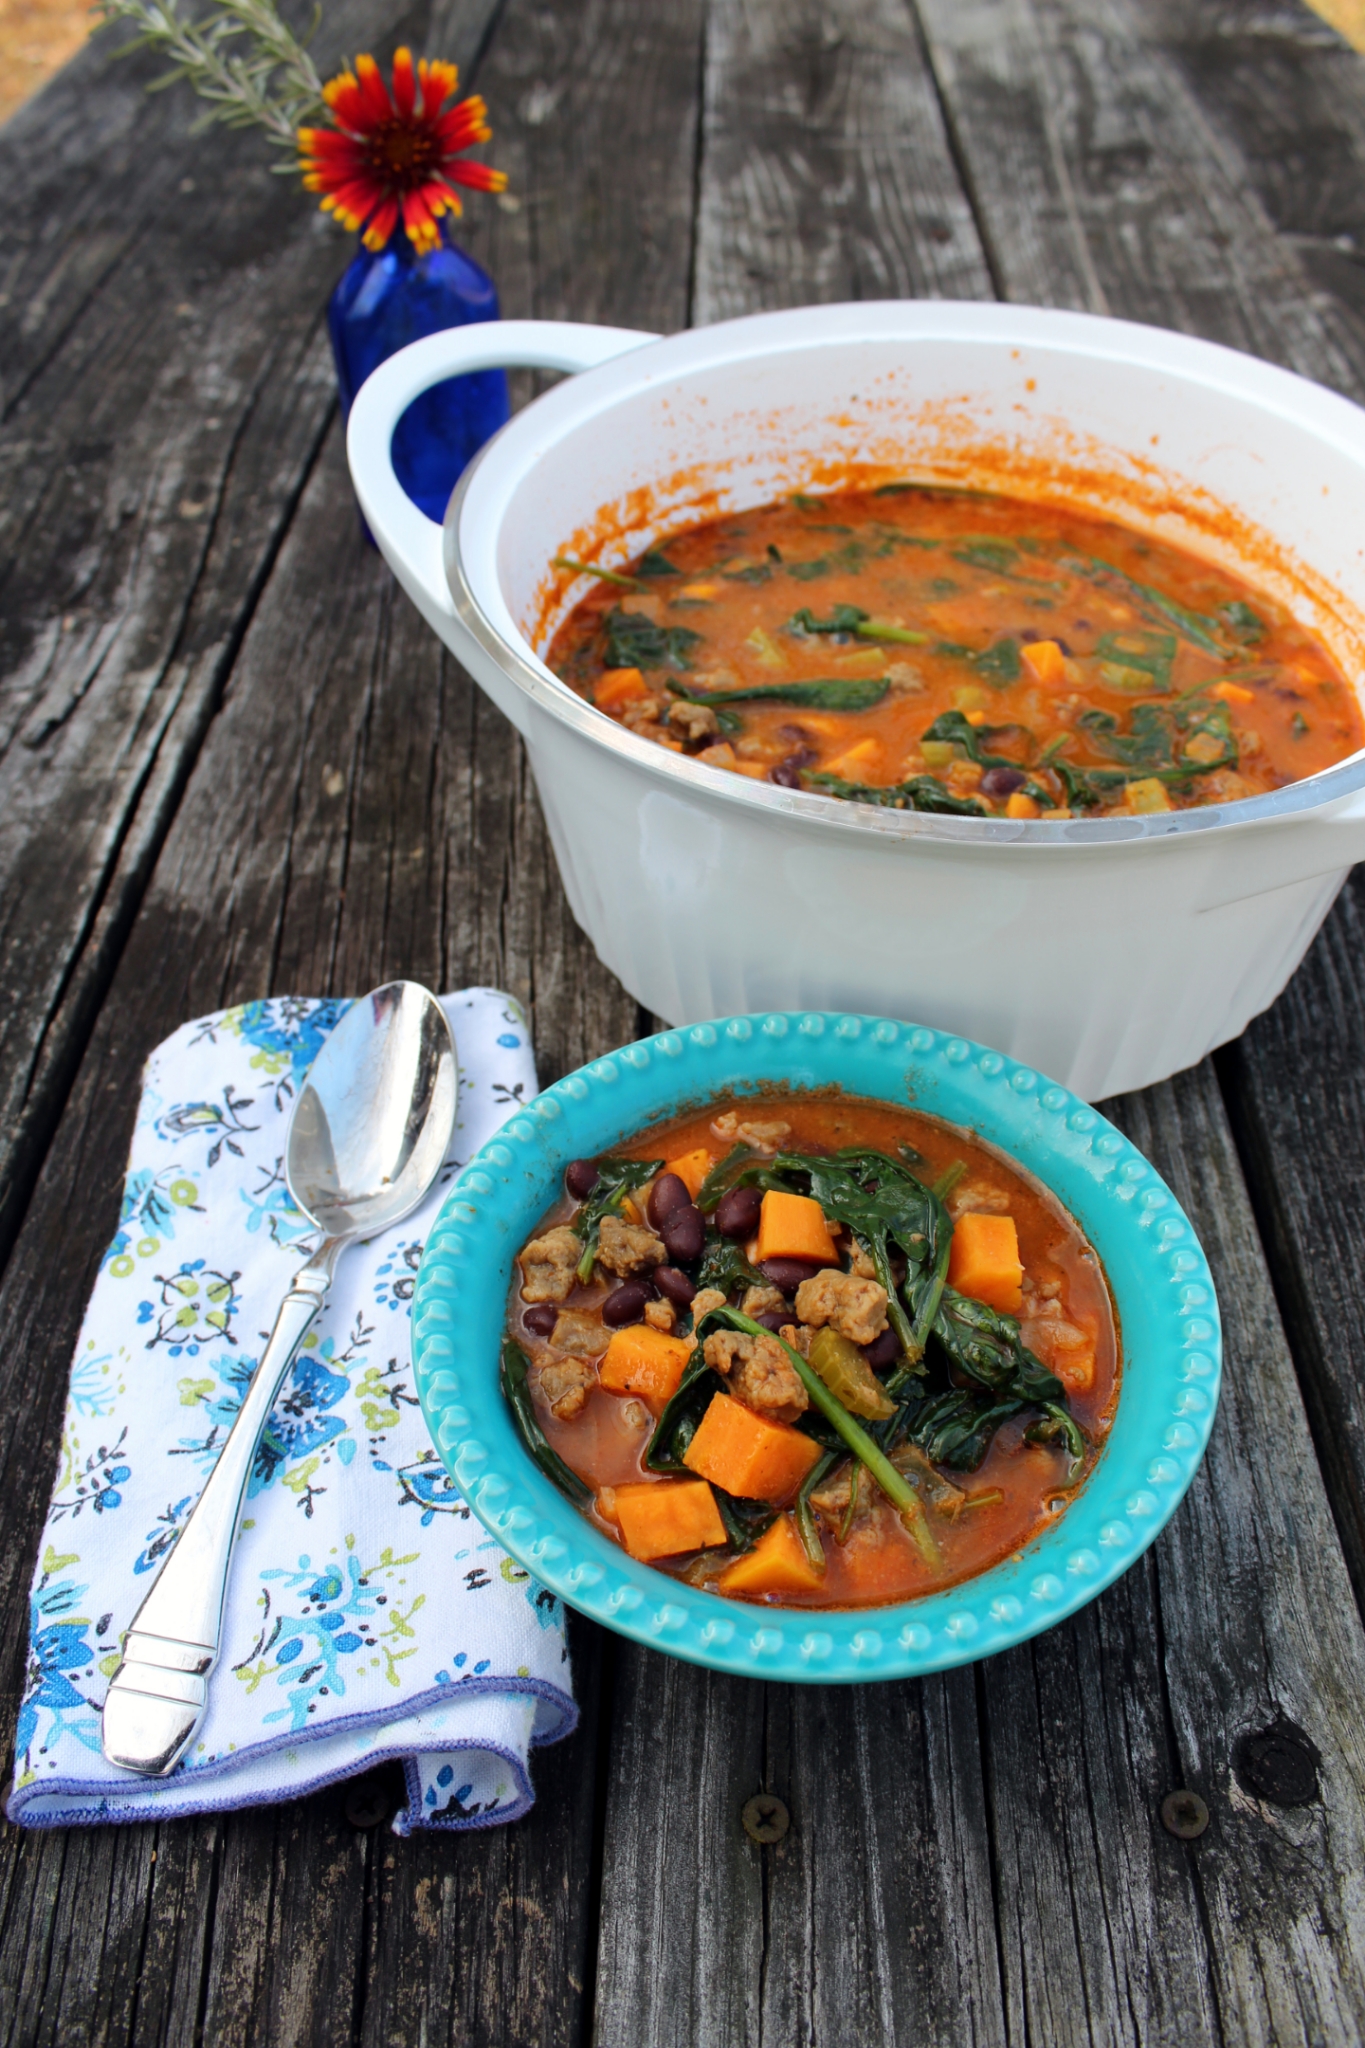 <p>"A simple plant-based soup containing sweet potatoes, black beans, and Beyond Meat "beef" crumbles," says Chef Mo. "Ready in under 45 minutes to warm you up with great health benefits!"</p>
                          